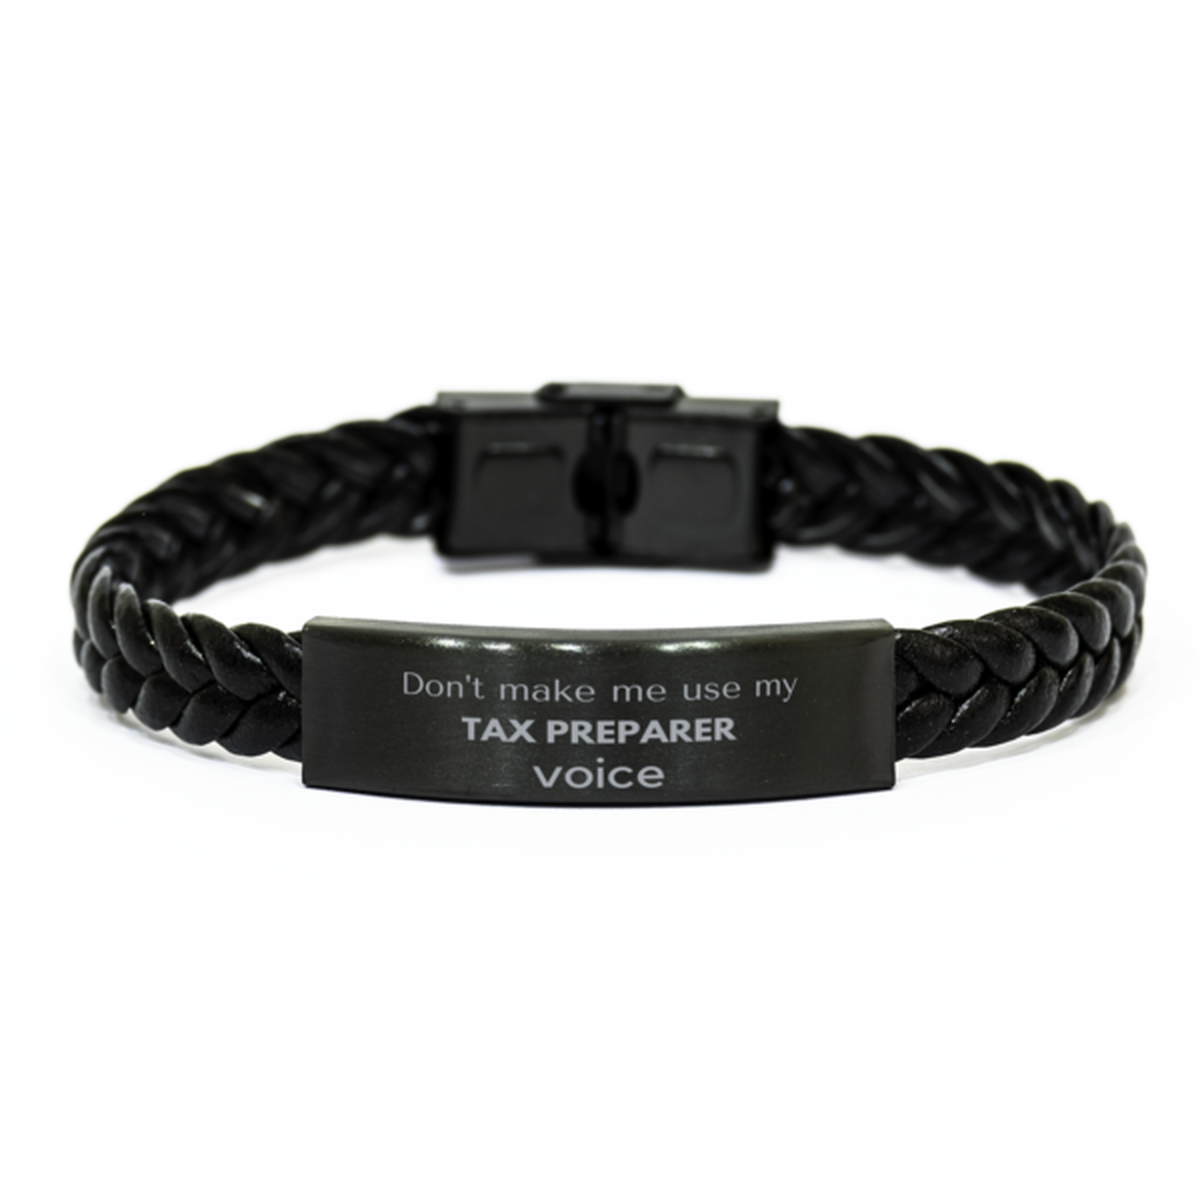 Don't make me use my Tax Preparer voice, Sarcasm Tax Preparer Gifts, Christmas Tax Preparer Braided Leather Bracelet Birthday Unique Gifts For Tax Preparer Coworkers, Men, Women, Colleague, Friends